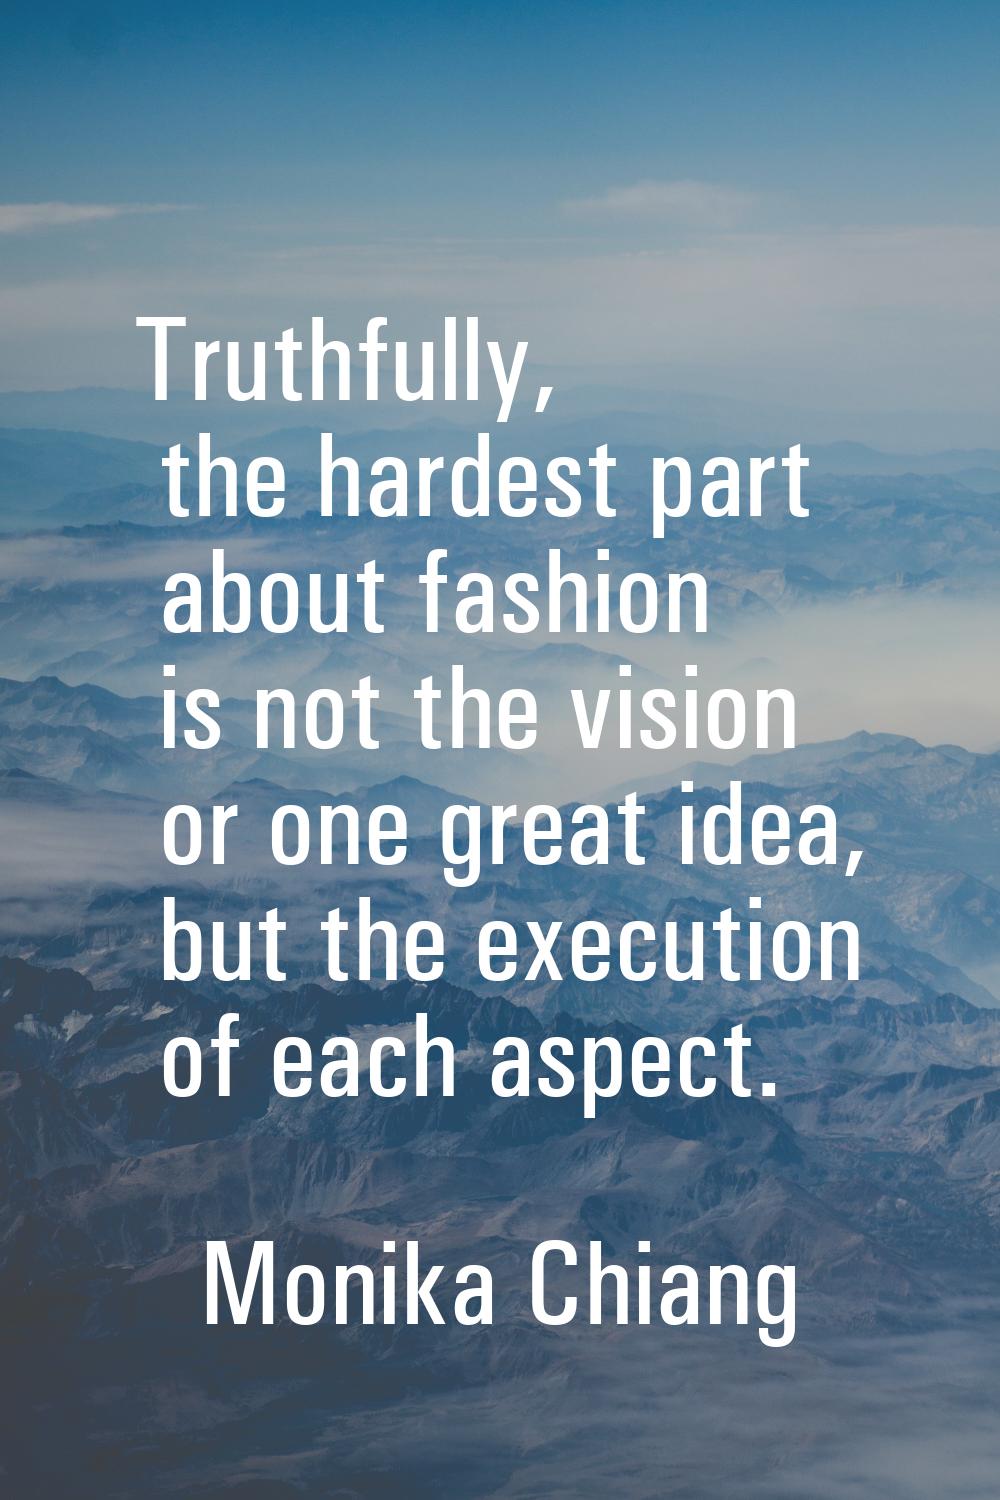 Truthfully, the hardest part about fashion is not the vision or one great idea, but the execution o